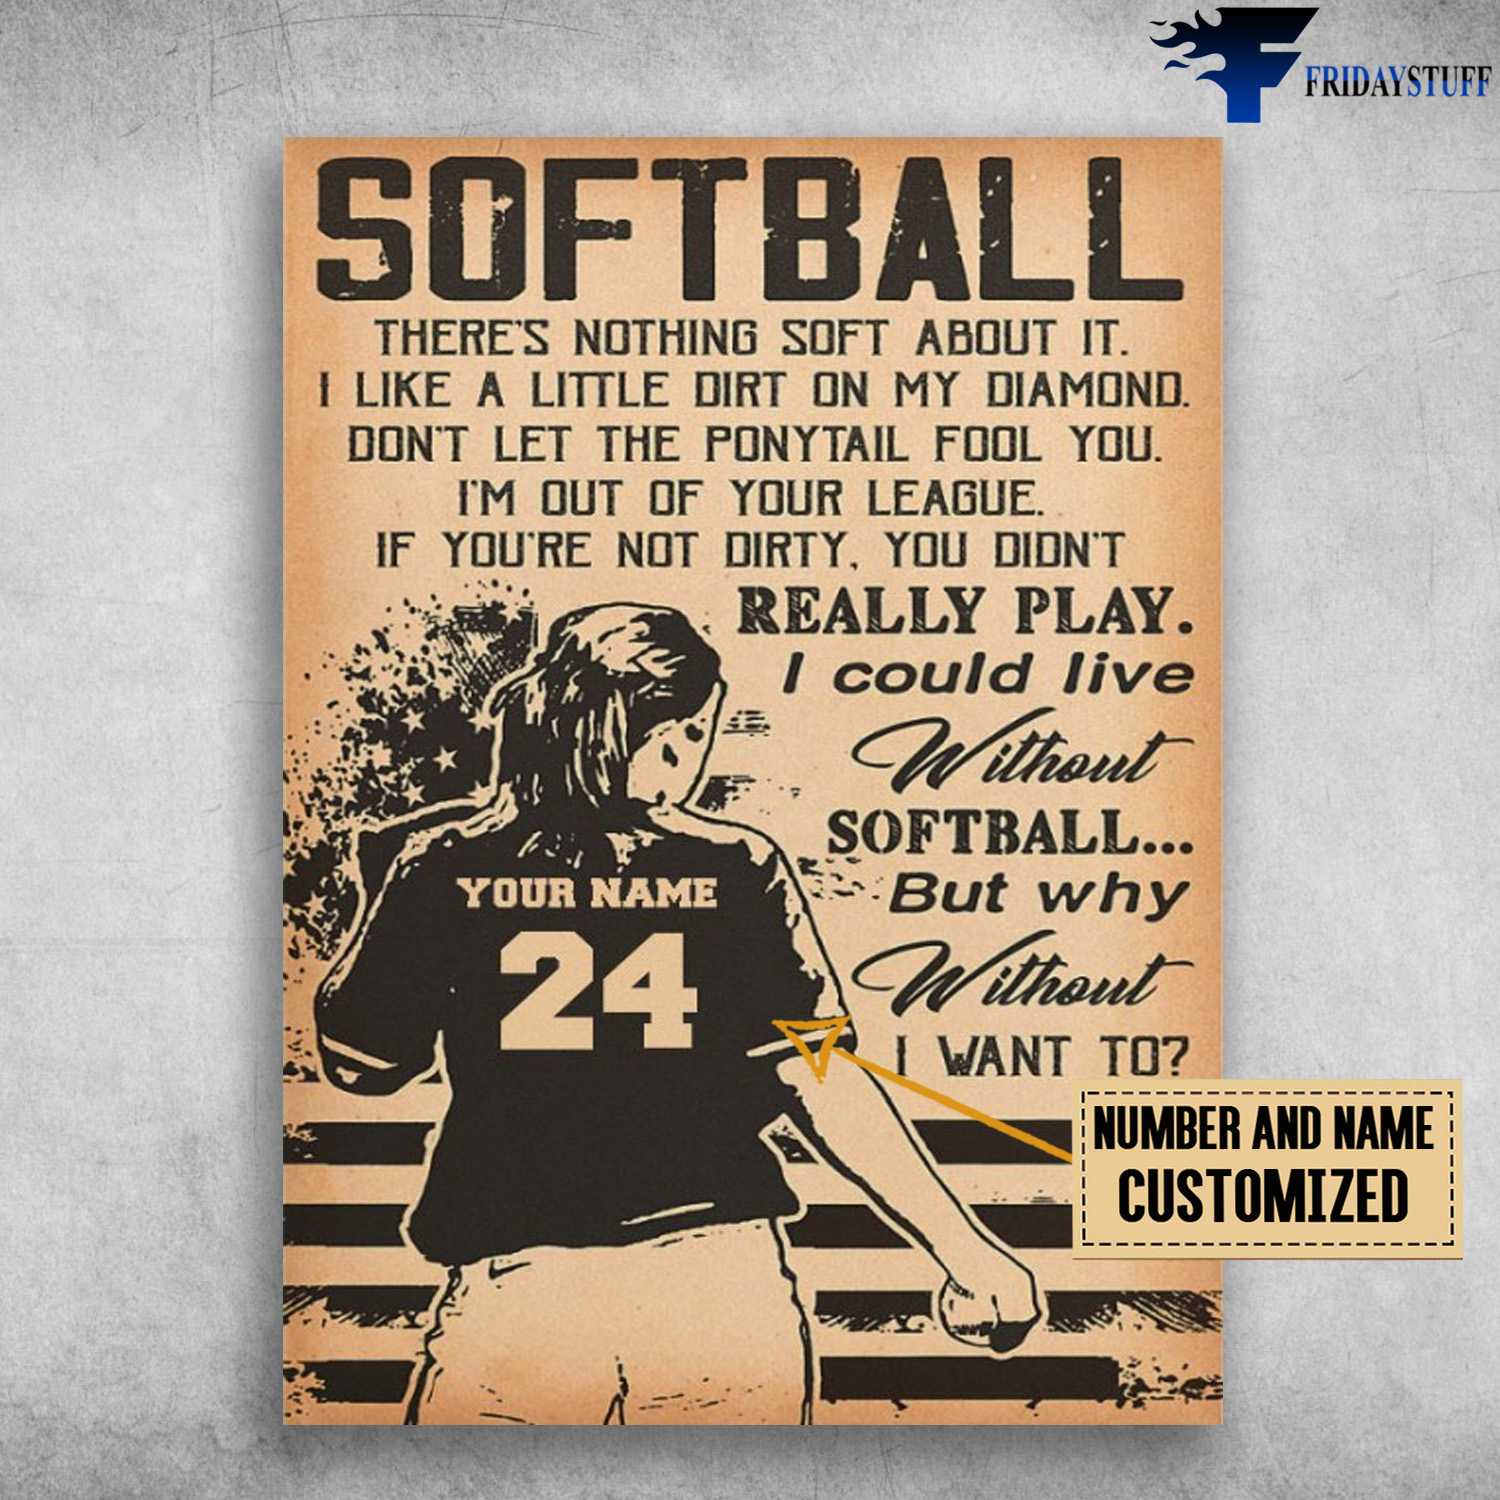 Softball Player, Softball Lover, There's Nothing Soft About It, I Like A Little Dirt On My Diamond, Don't Let The Ponytail Food You, I'm Out Of Your League